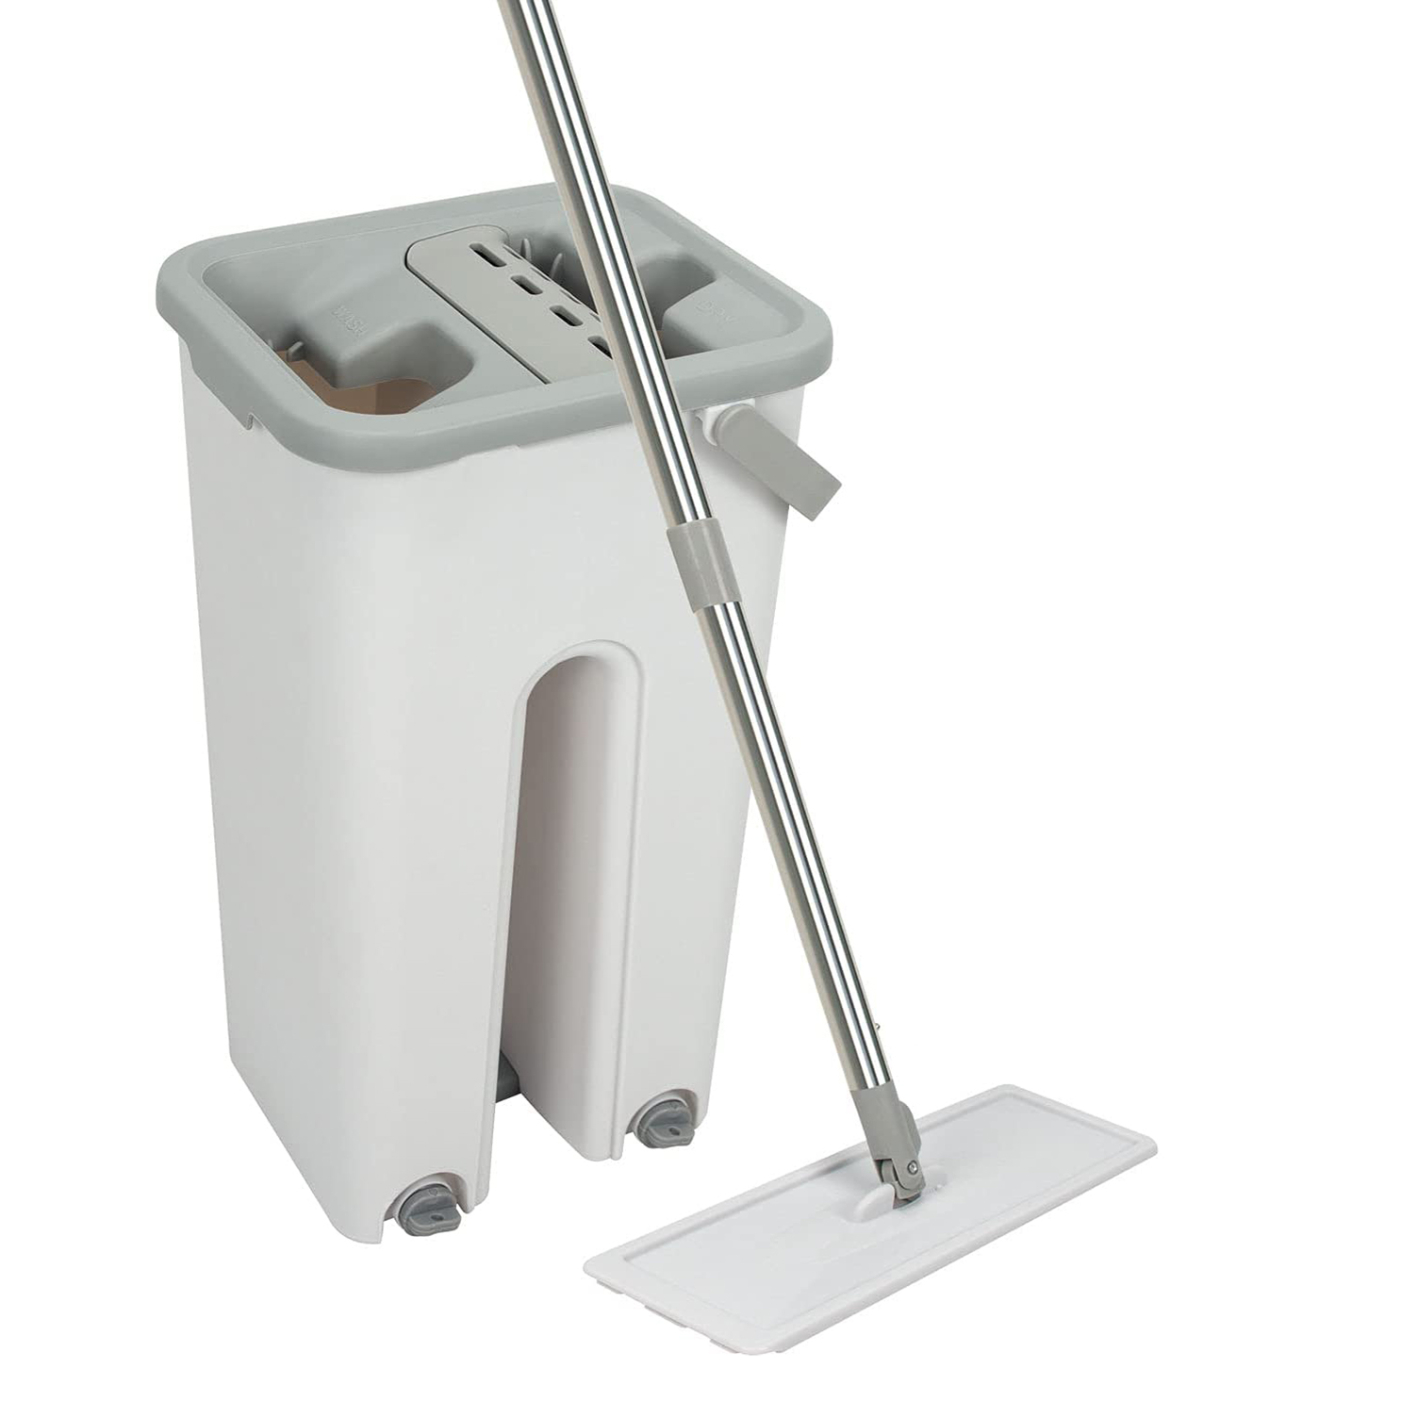 Flat Floor Mop and Bucket Hand-Free Wringing Cleaning Mop Bucket Wet and Dry Use for Office & Home & Kitchen Floors Cleaning